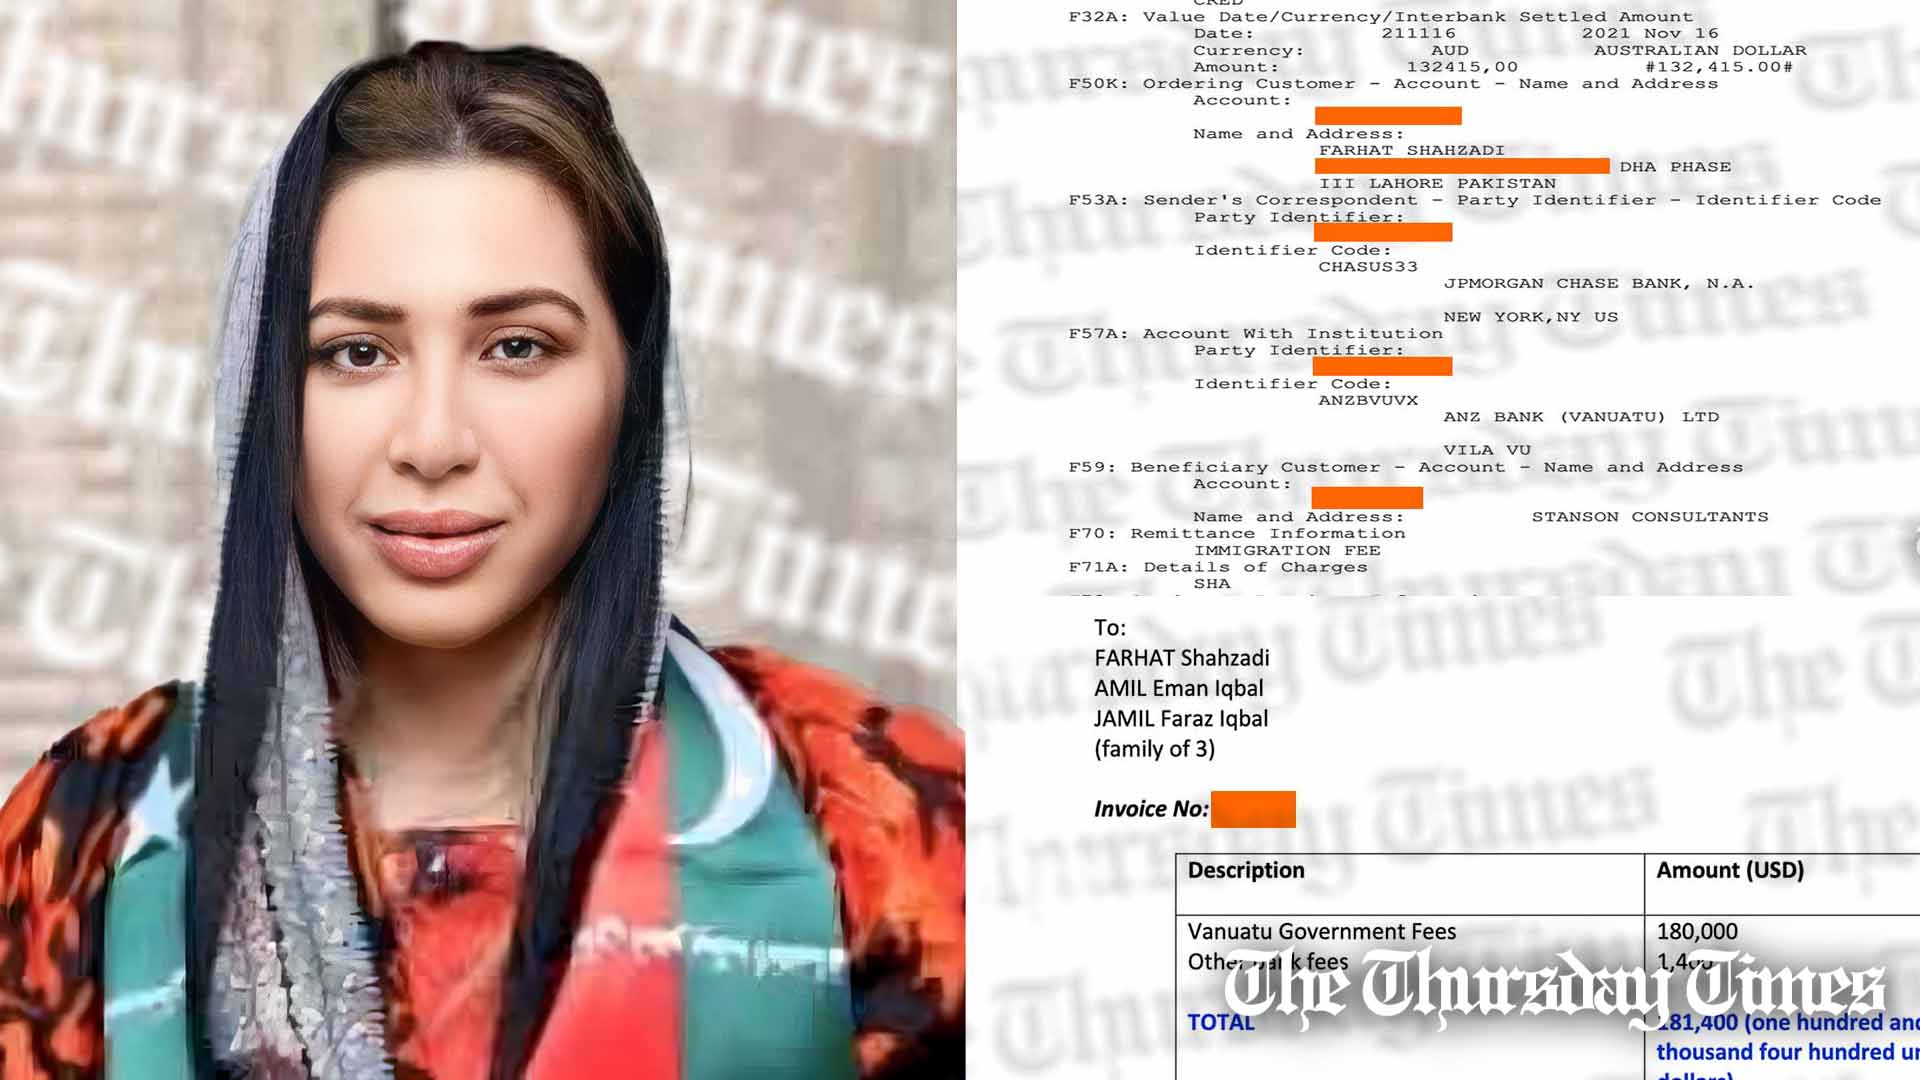 A combined file photo is shown of PTI associate Farhat Shahzadi, alias Farah Gogi (L) and exclusive documents indicating the purchase of a Vanuatu passport by Gogi (R). — FILE/THE THURSDAY TIMES